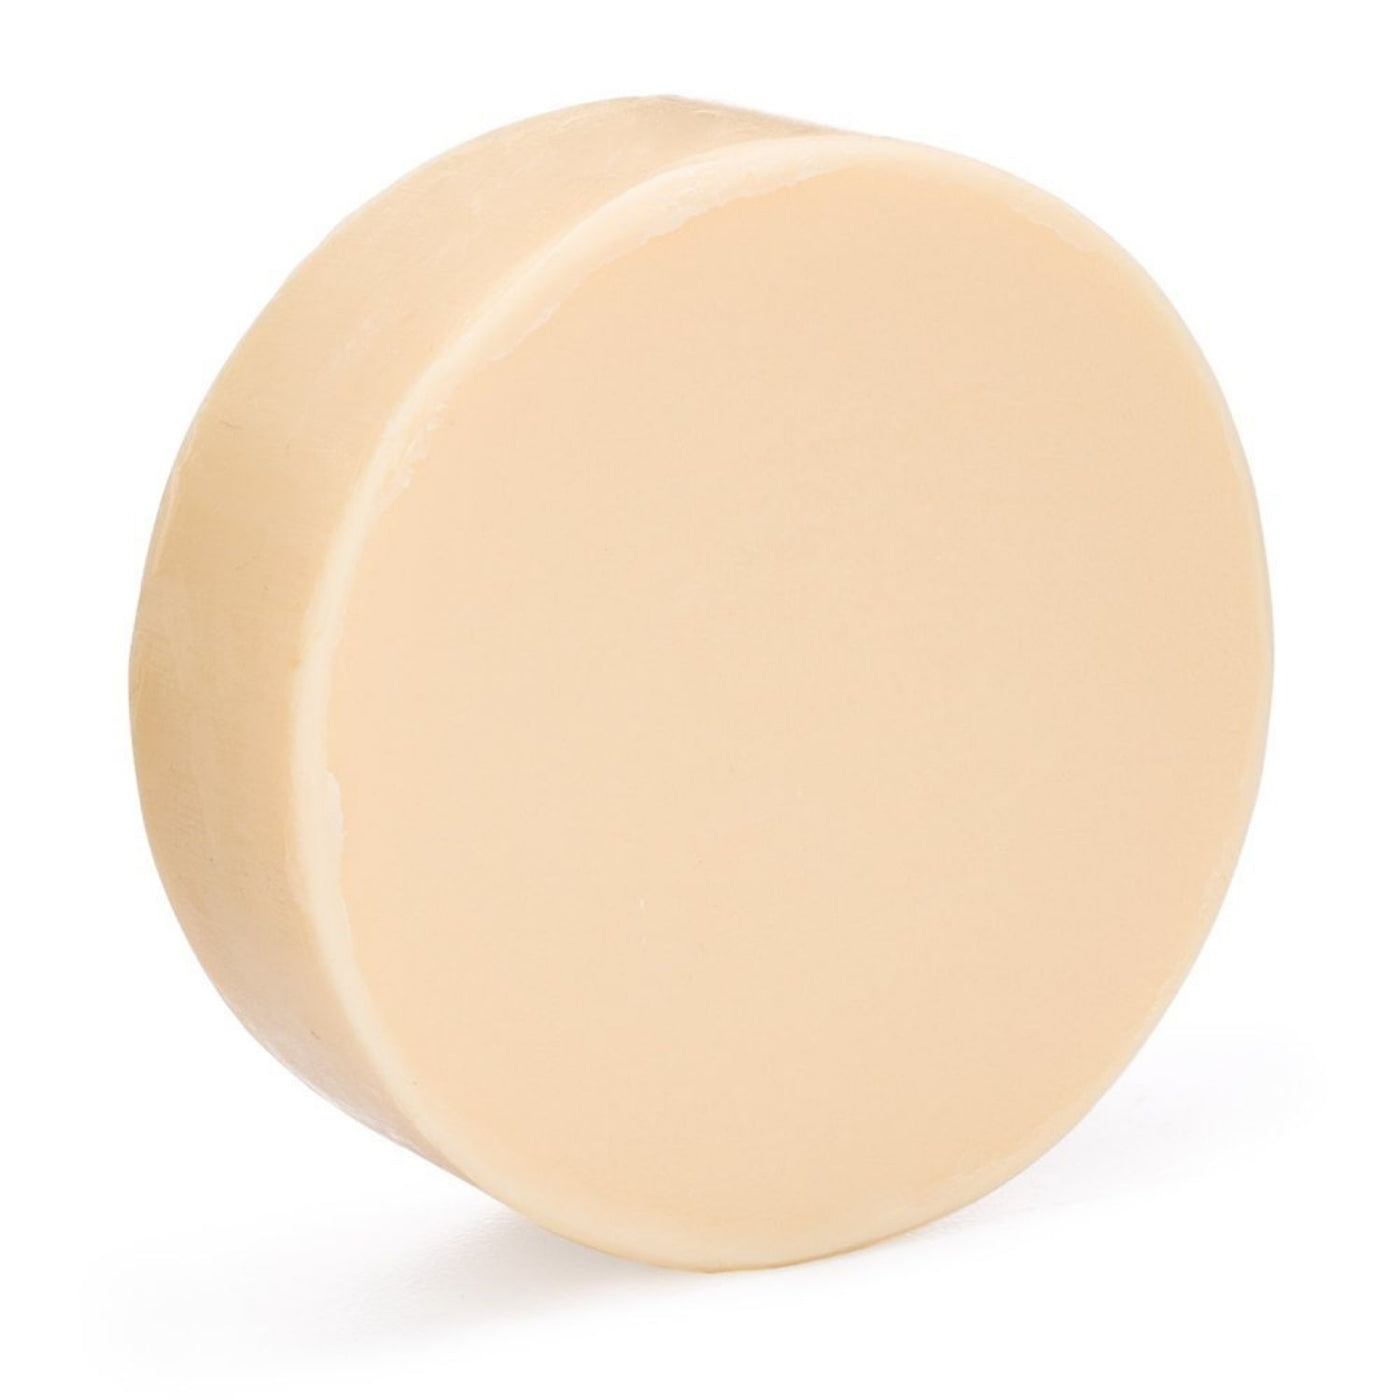  Noah's Organic Shave Puck | 3 Pucks by Naked Armor sold by Naked Armor Razors